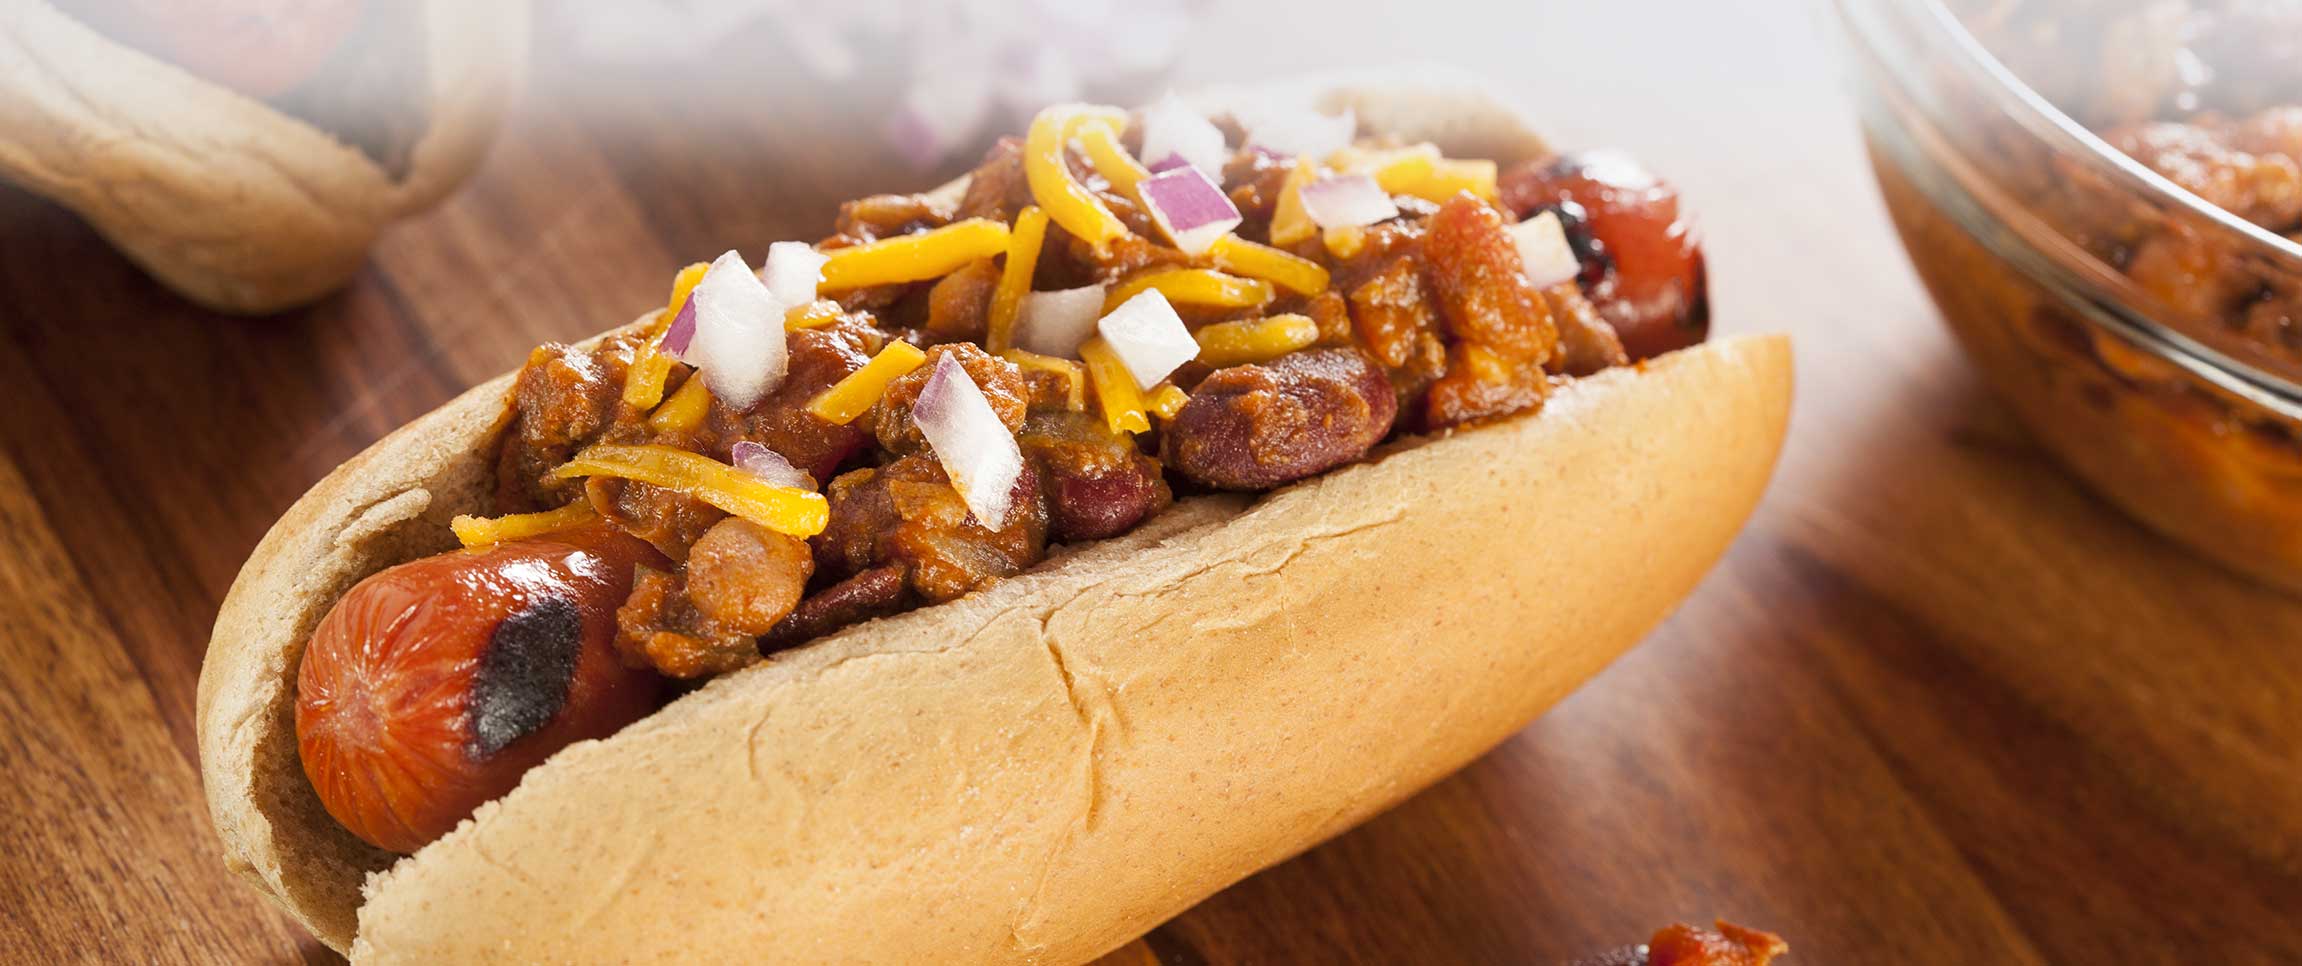 Chili Dog with Cheese and Onions